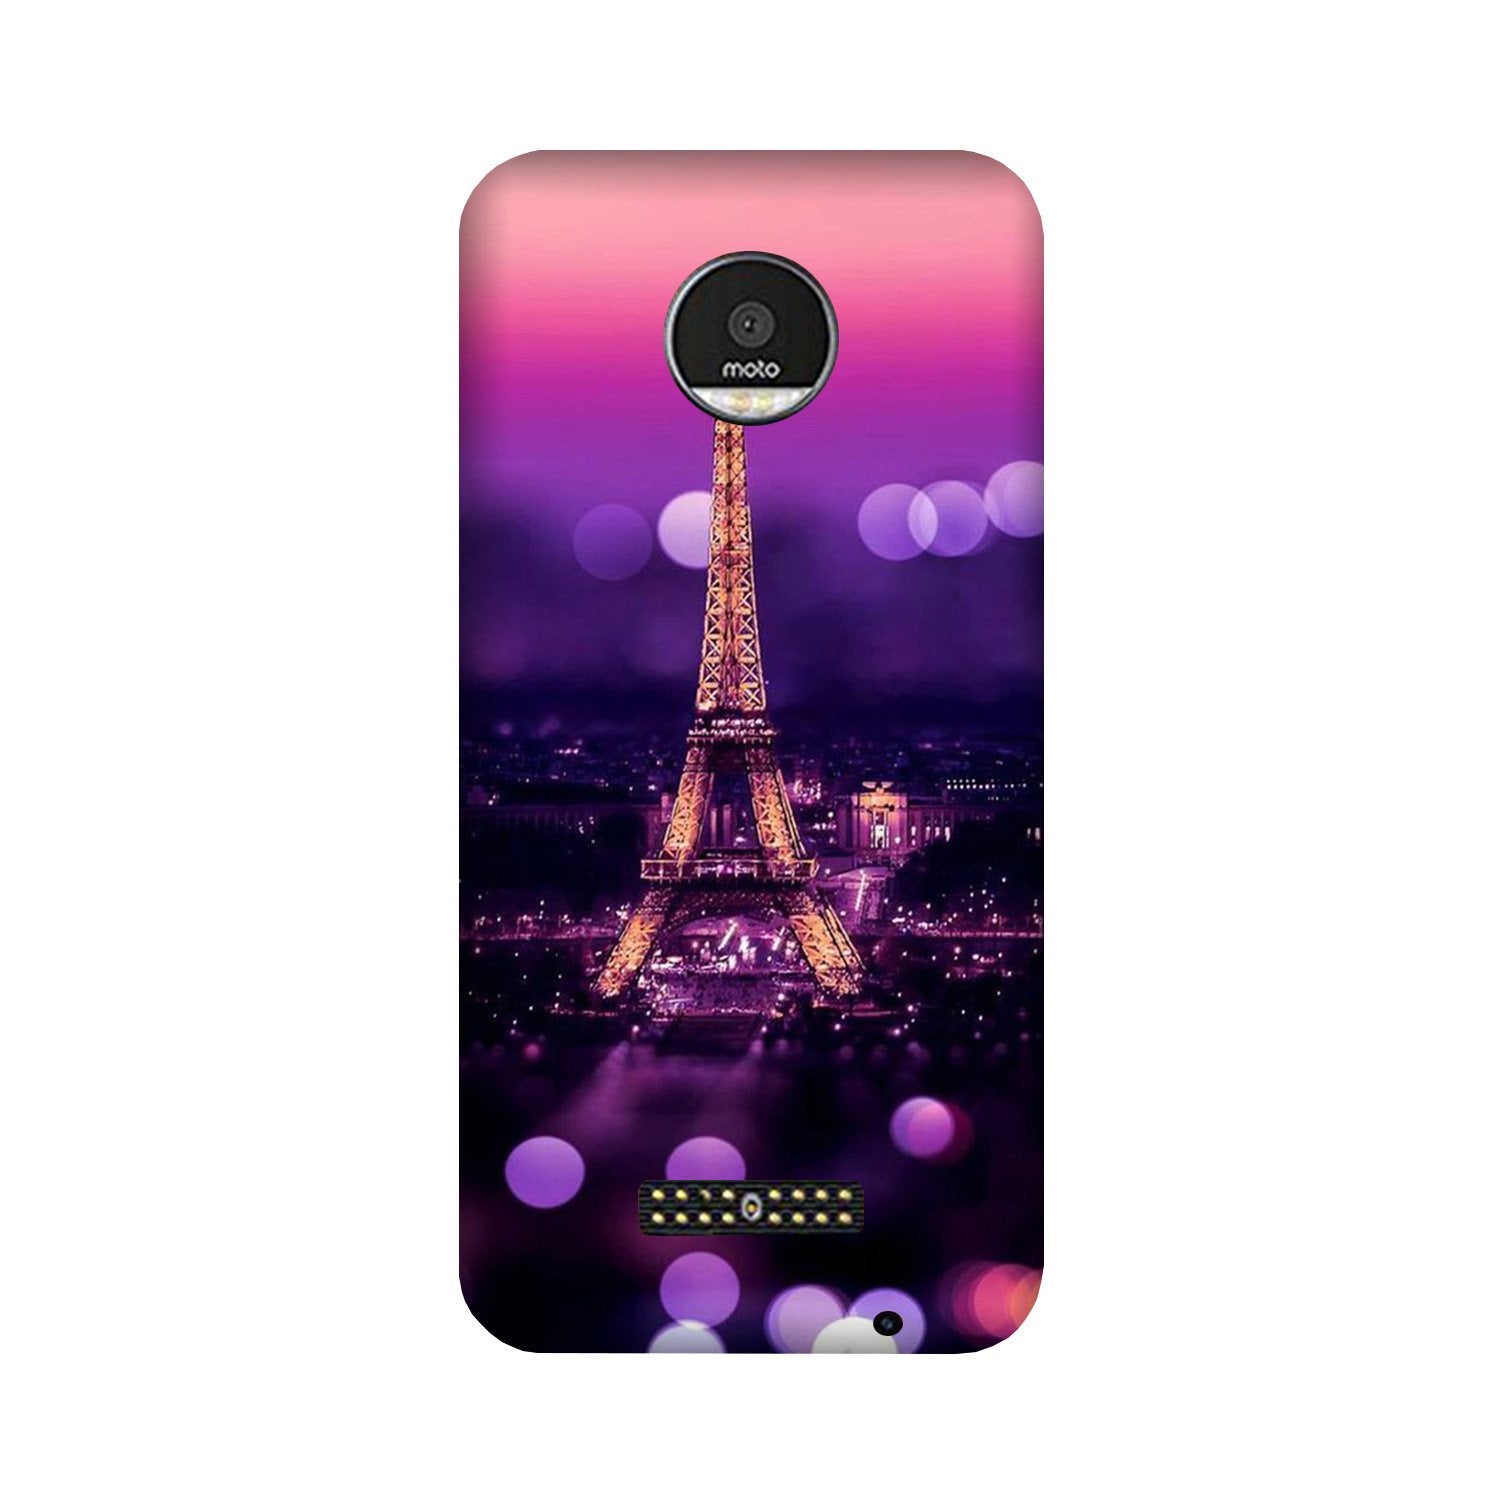 Eiffel Tower Case for Moto Z2 Play